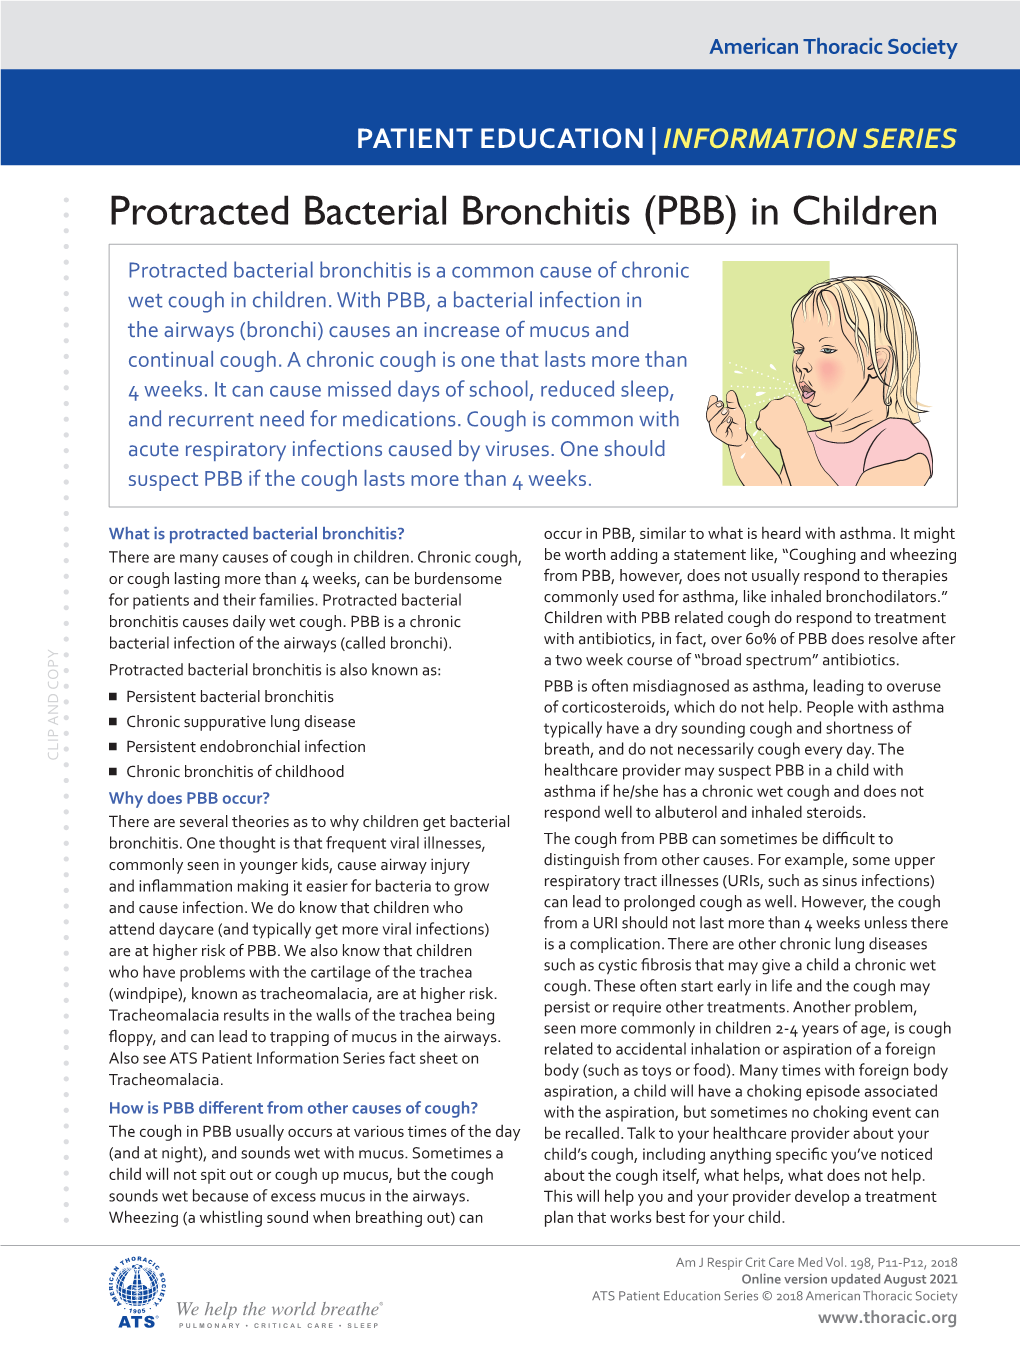 Protracted Bacterial Bronchitis (PBB) in Children